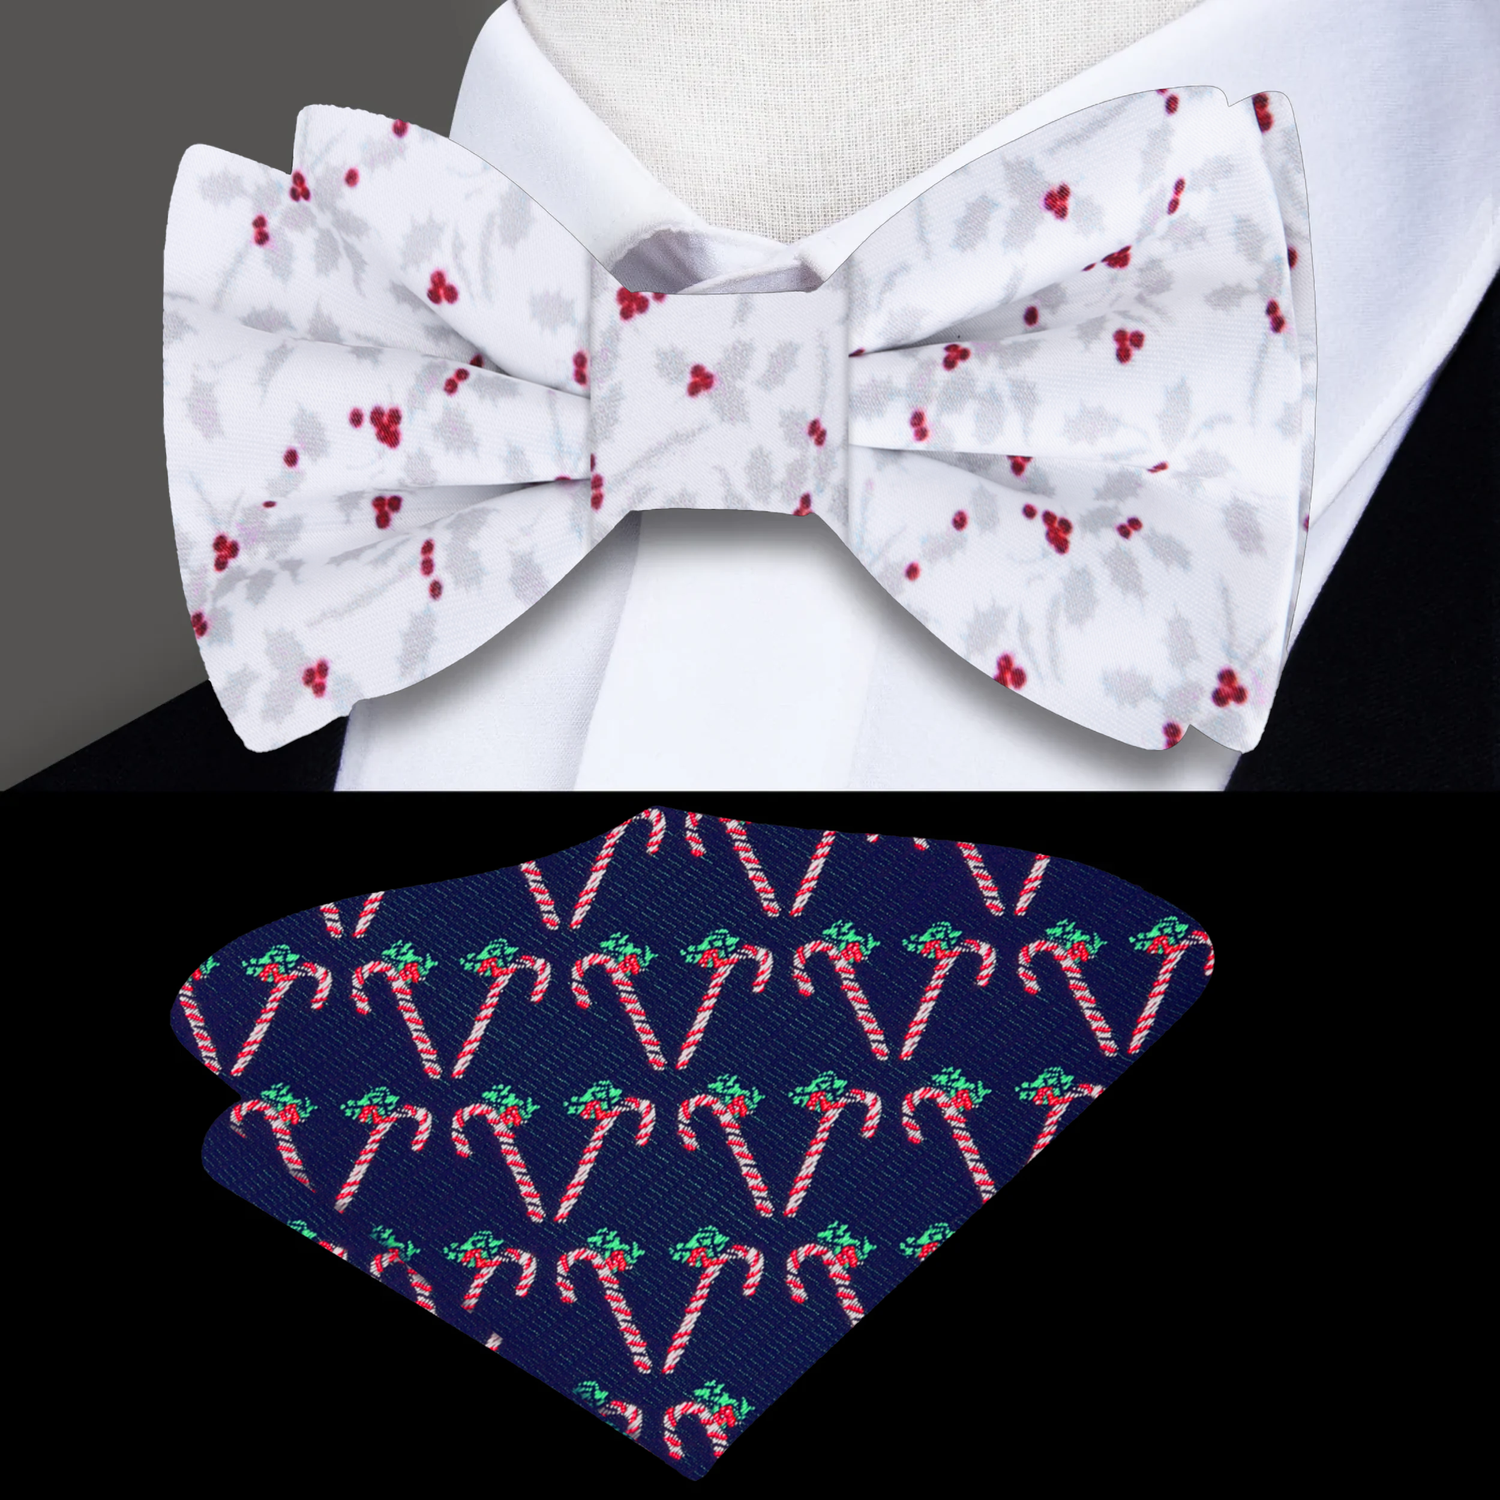 White, Red, Silver Holly Berries Bow Tie and Accenting Pocket Square